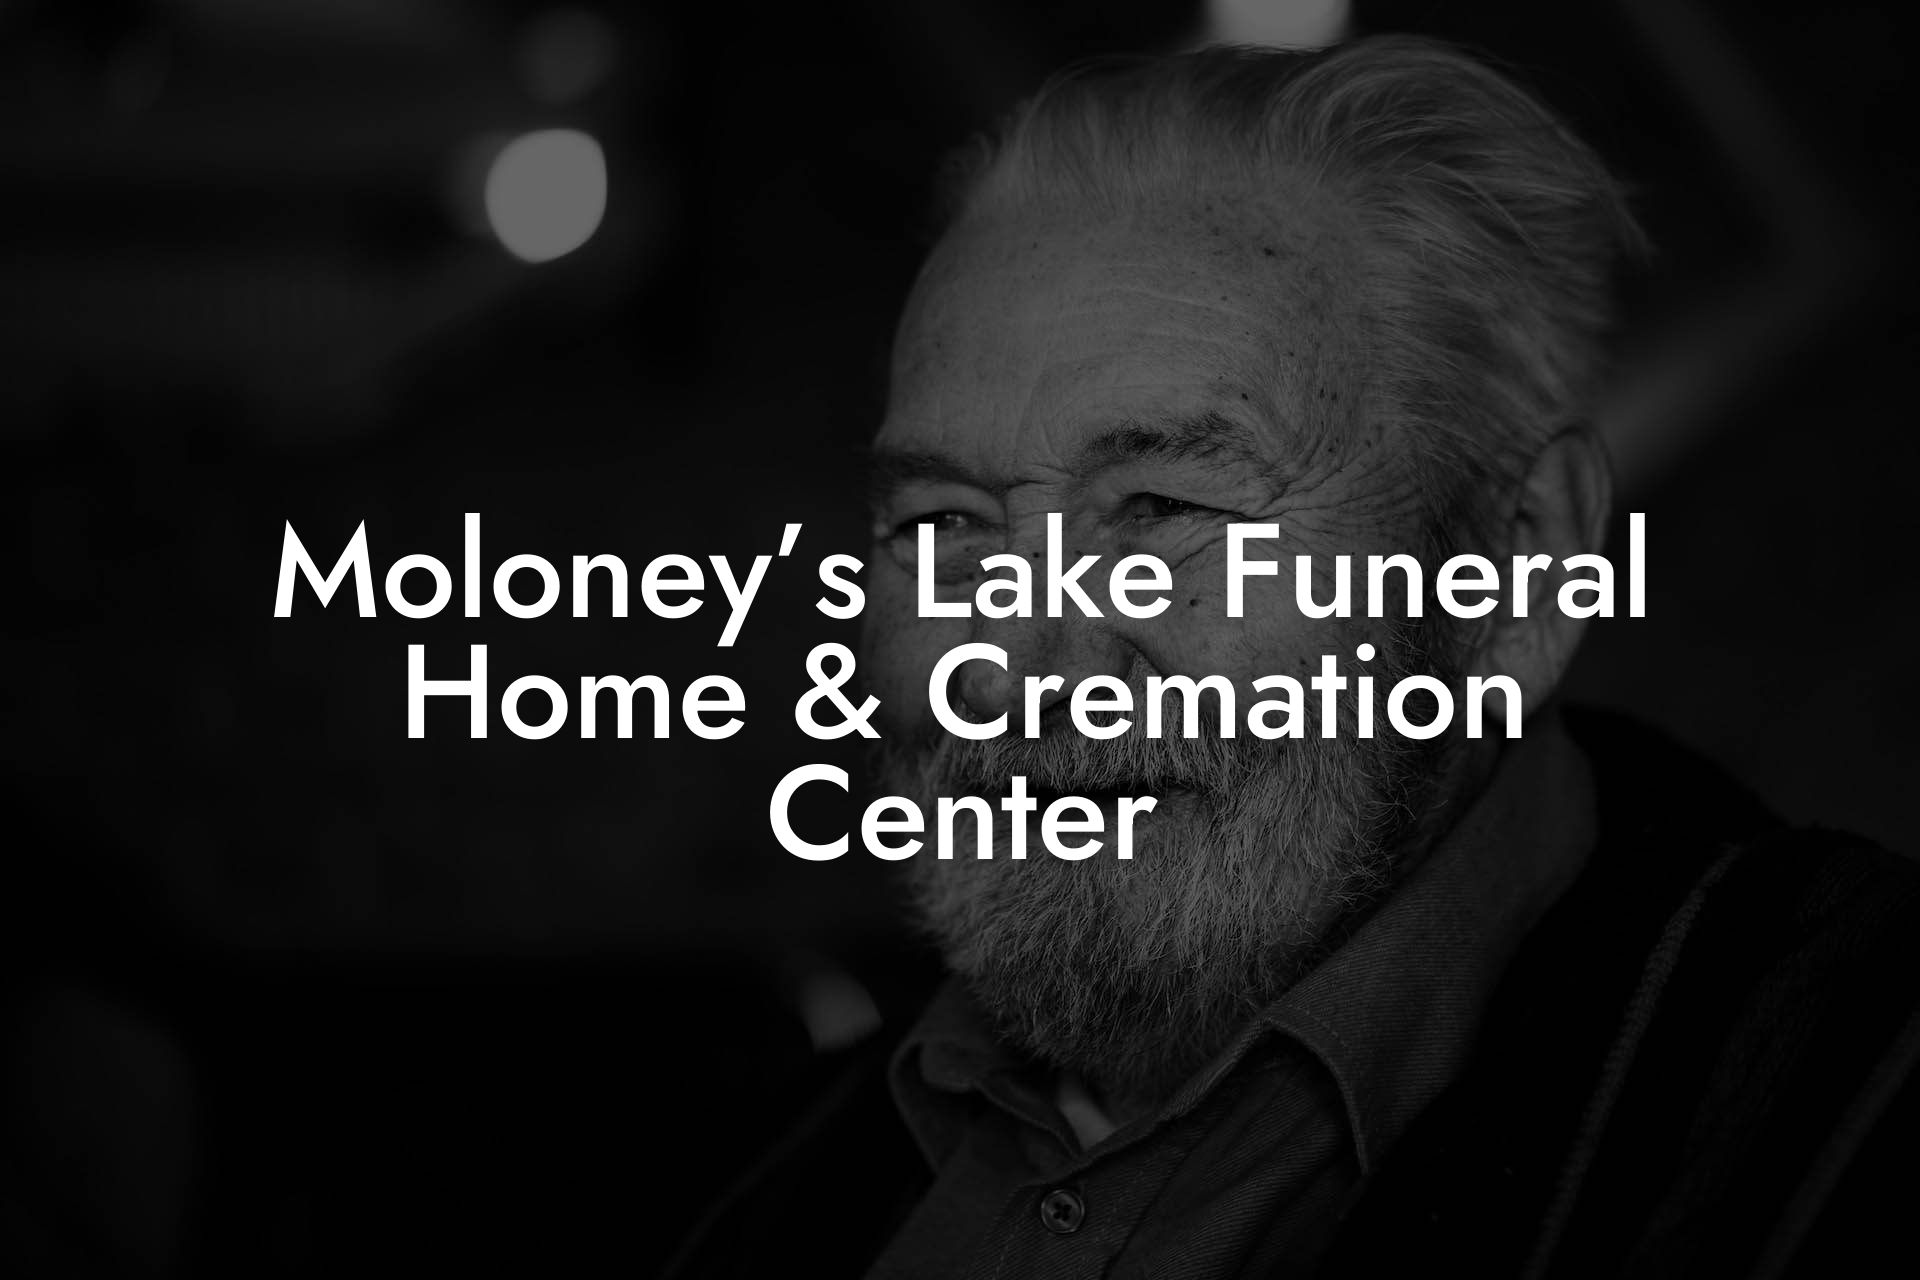 Moloney’s Lake Funeral Home & Cremation Center